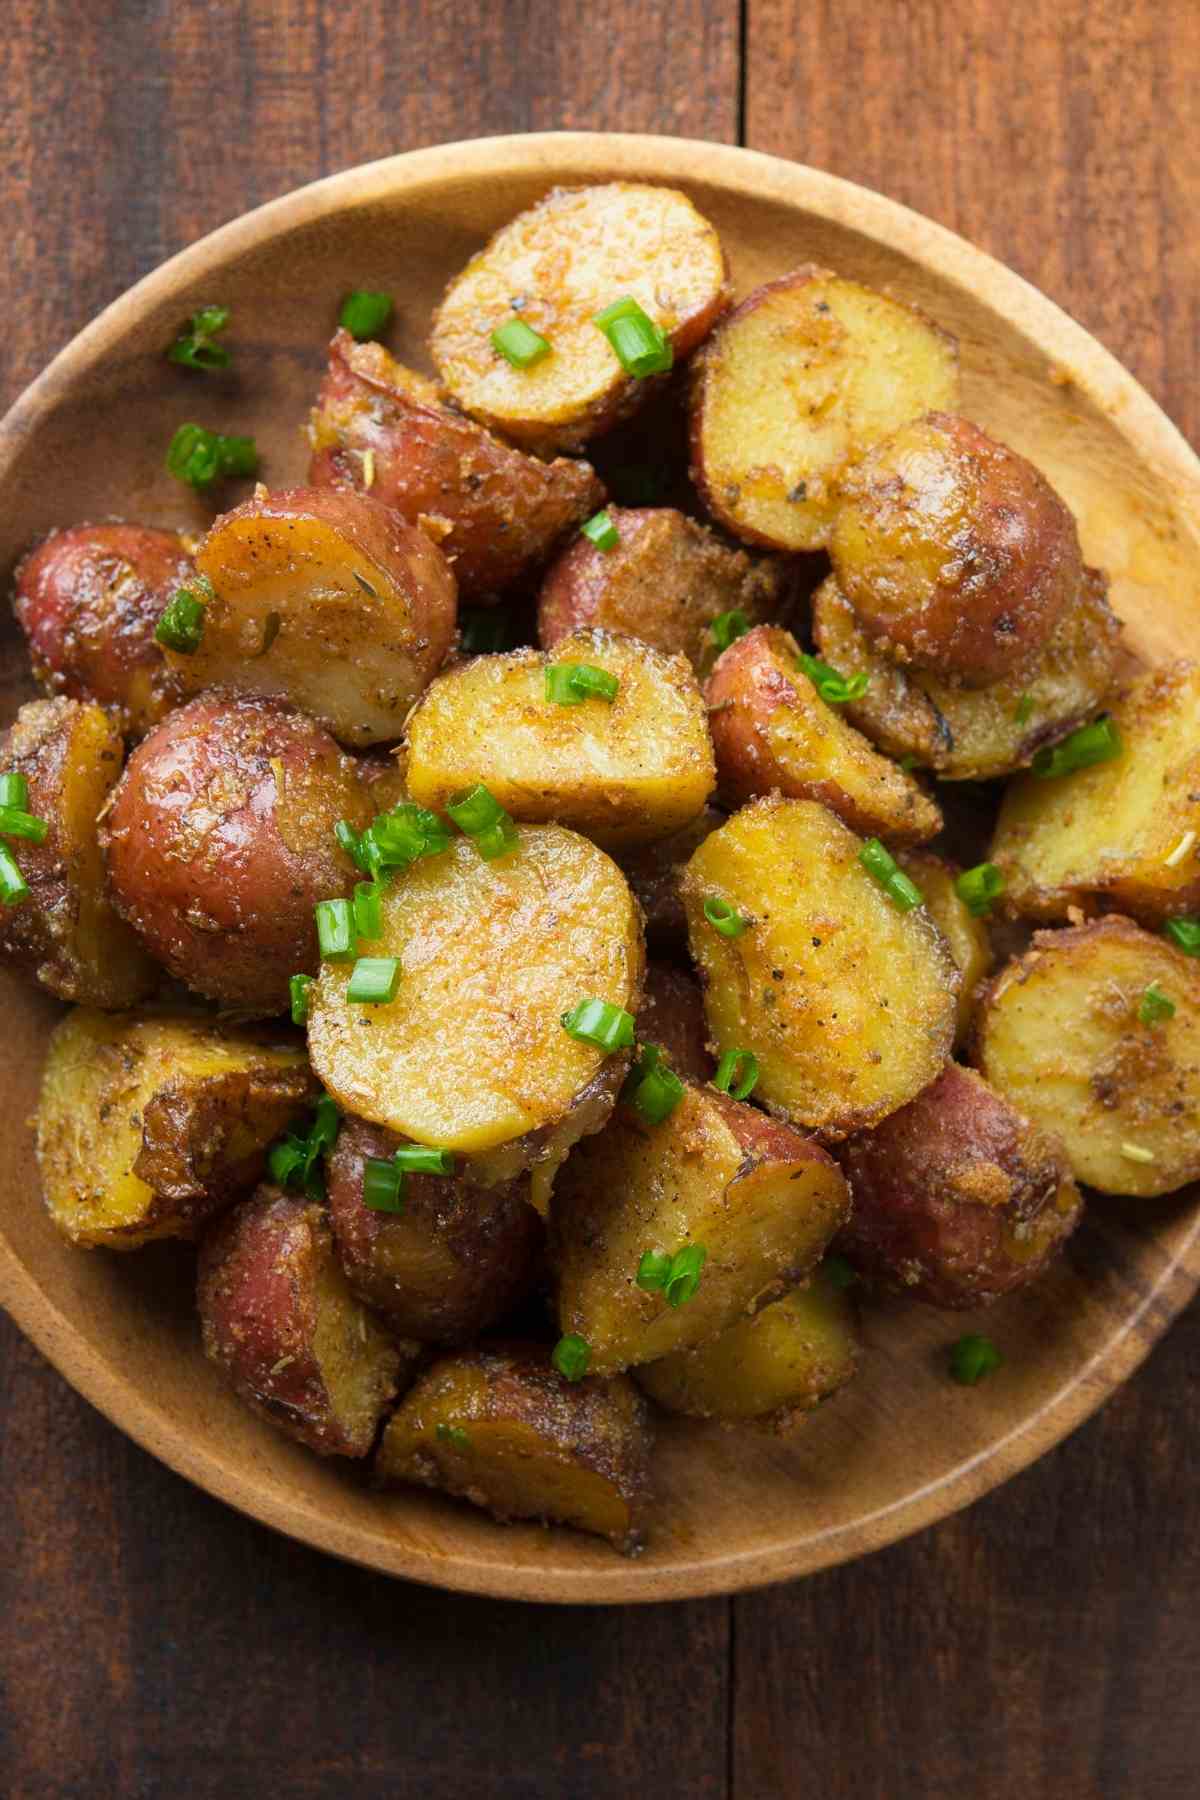 These roasted red potatoes are tender on the inside, crispy on the outside, and coated in a delicious combination of garlic, herbs and Parmesan cheese. They’re the perfect dish to serve alongside chicken, beef, pork, or fish.